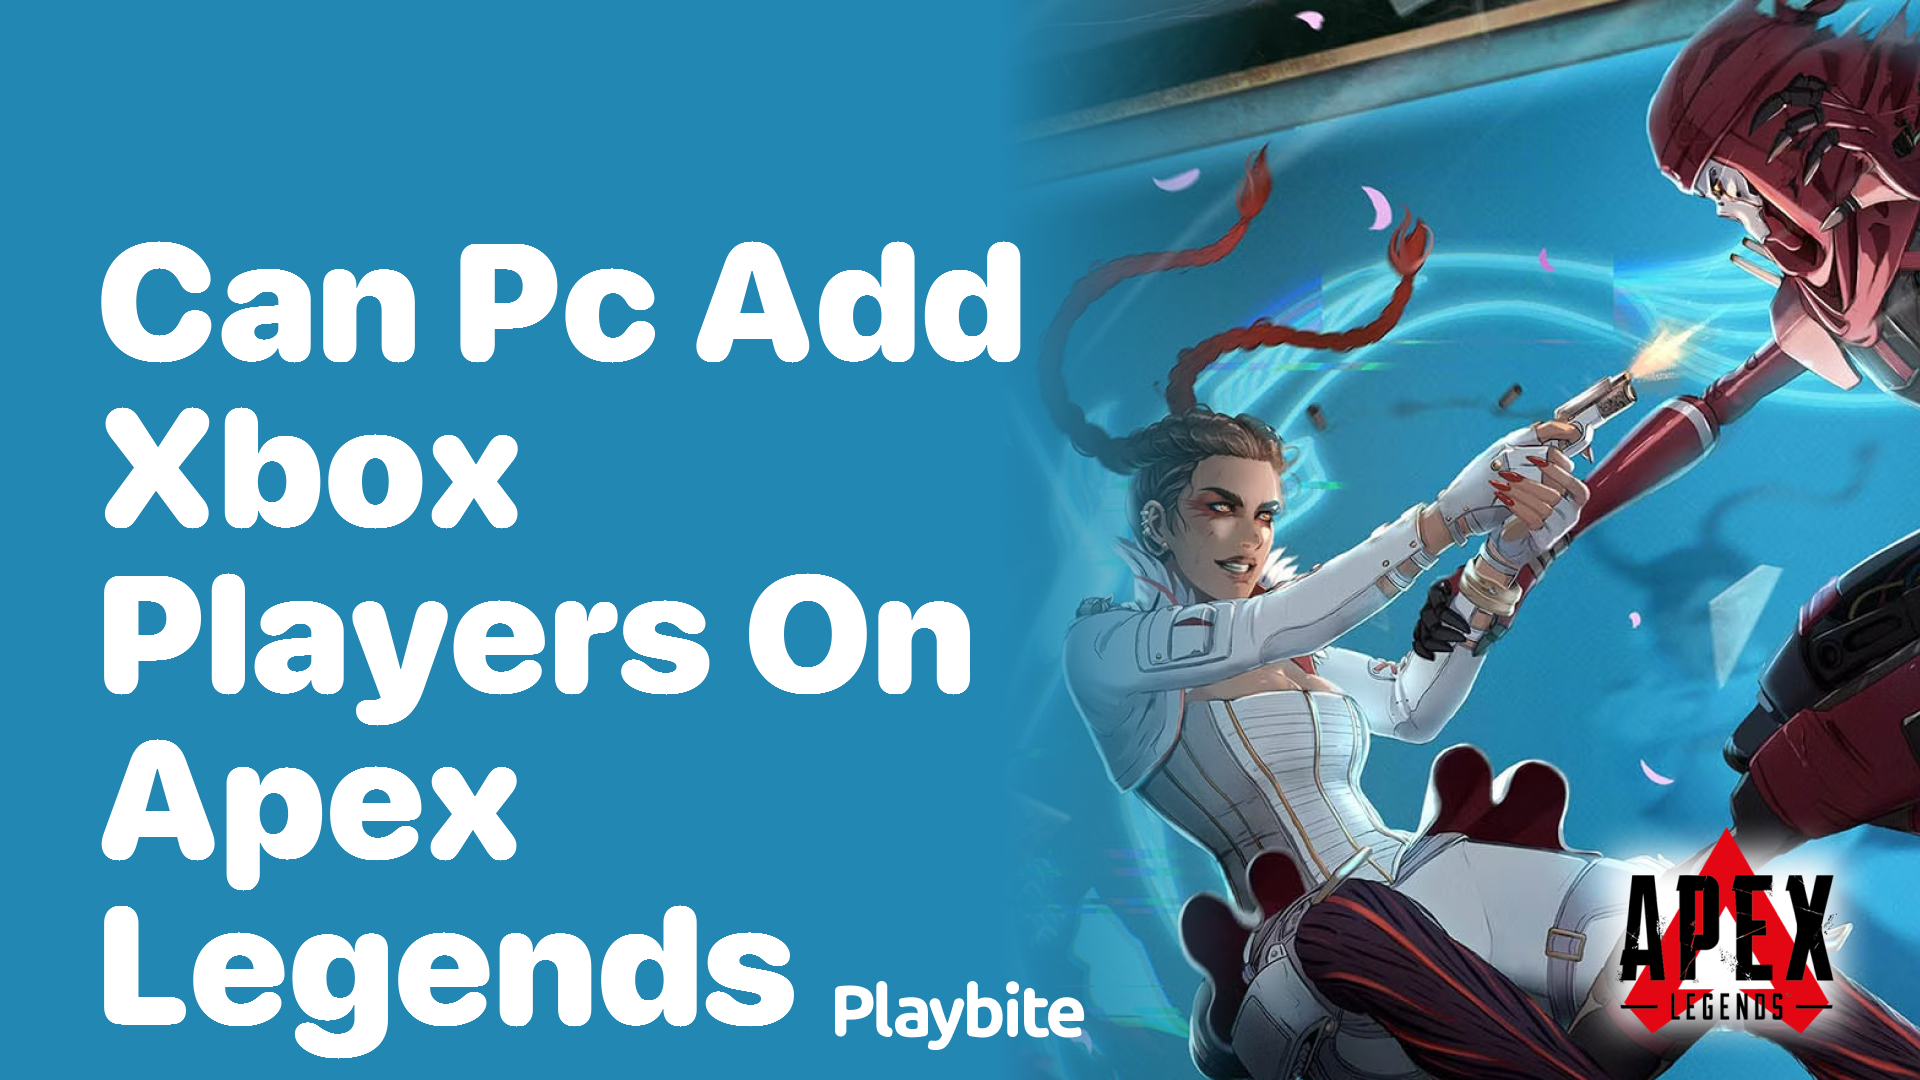 Can PC players add Xbox players?